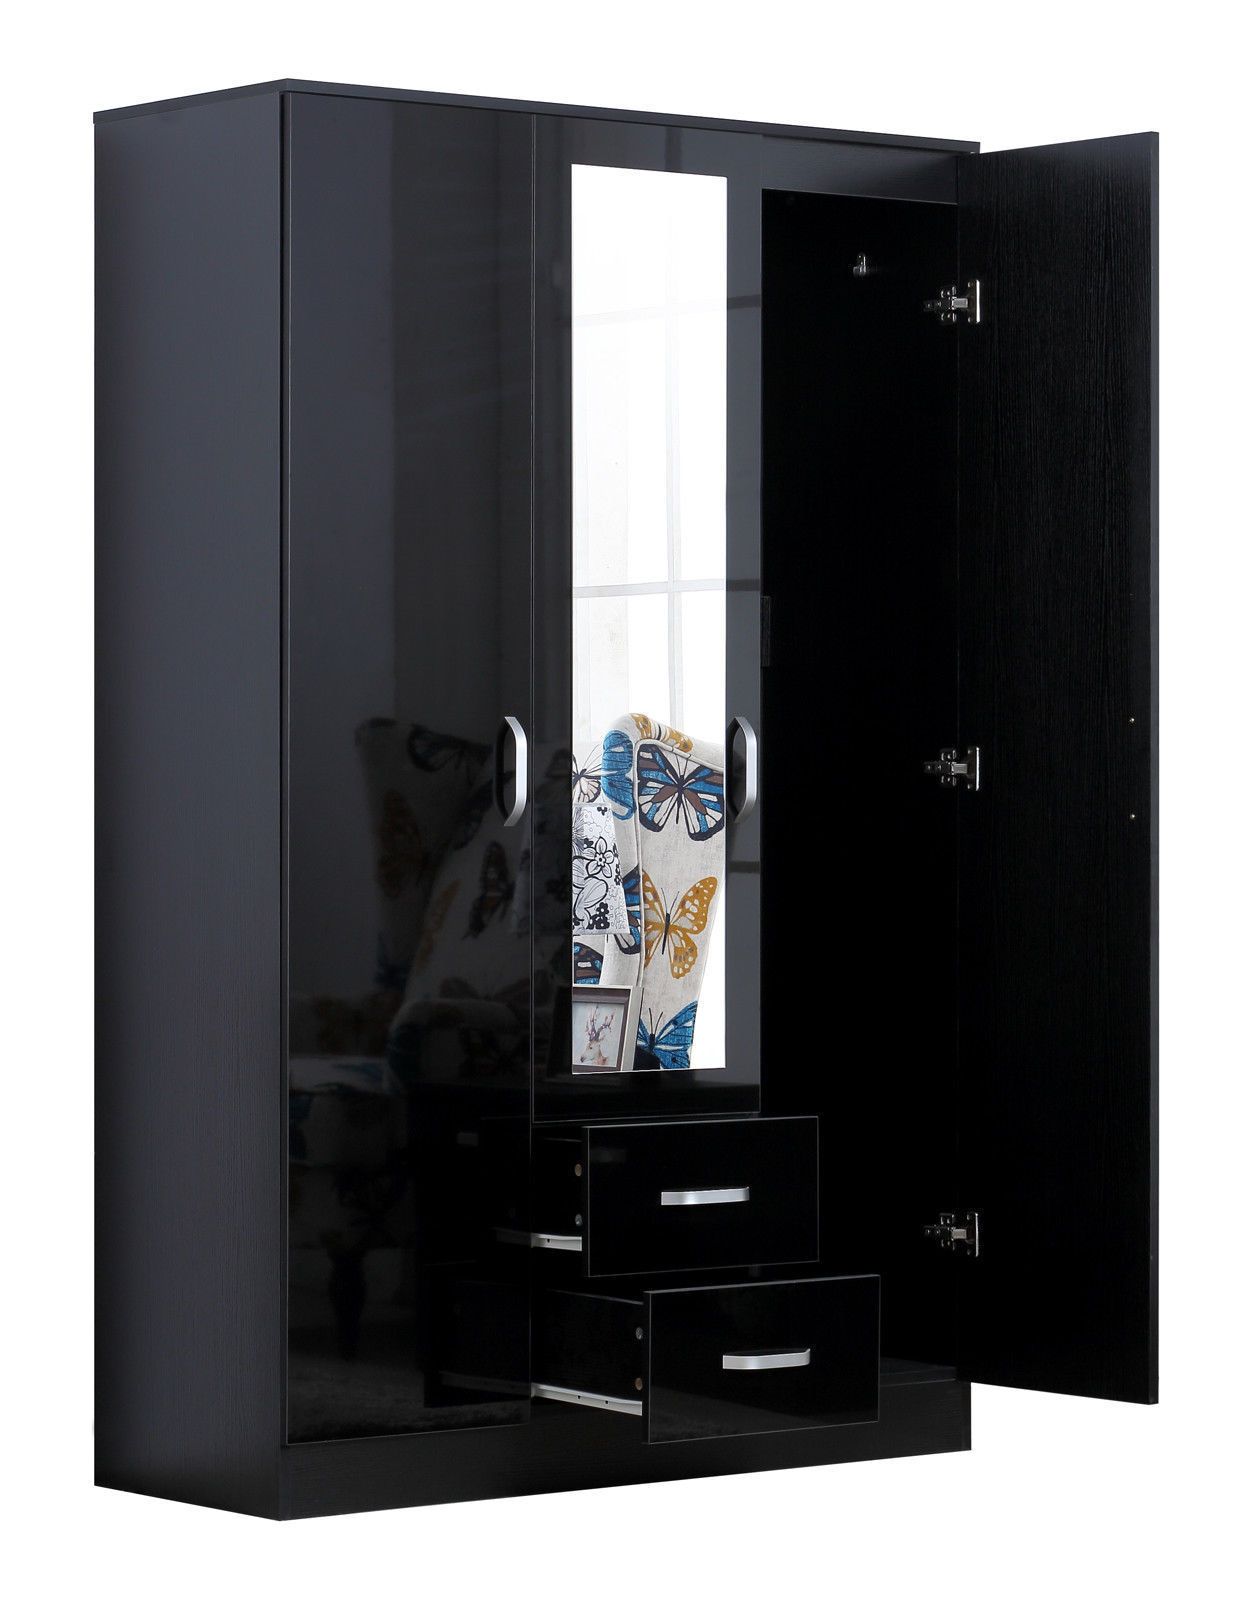 Mirror Xl Black High Gloss 3 Door Wardrobe With 2 Drawers And 1 Mirror |  Ebay Inside Black Gloss Mirror Wardrobes (View 7 of 14)